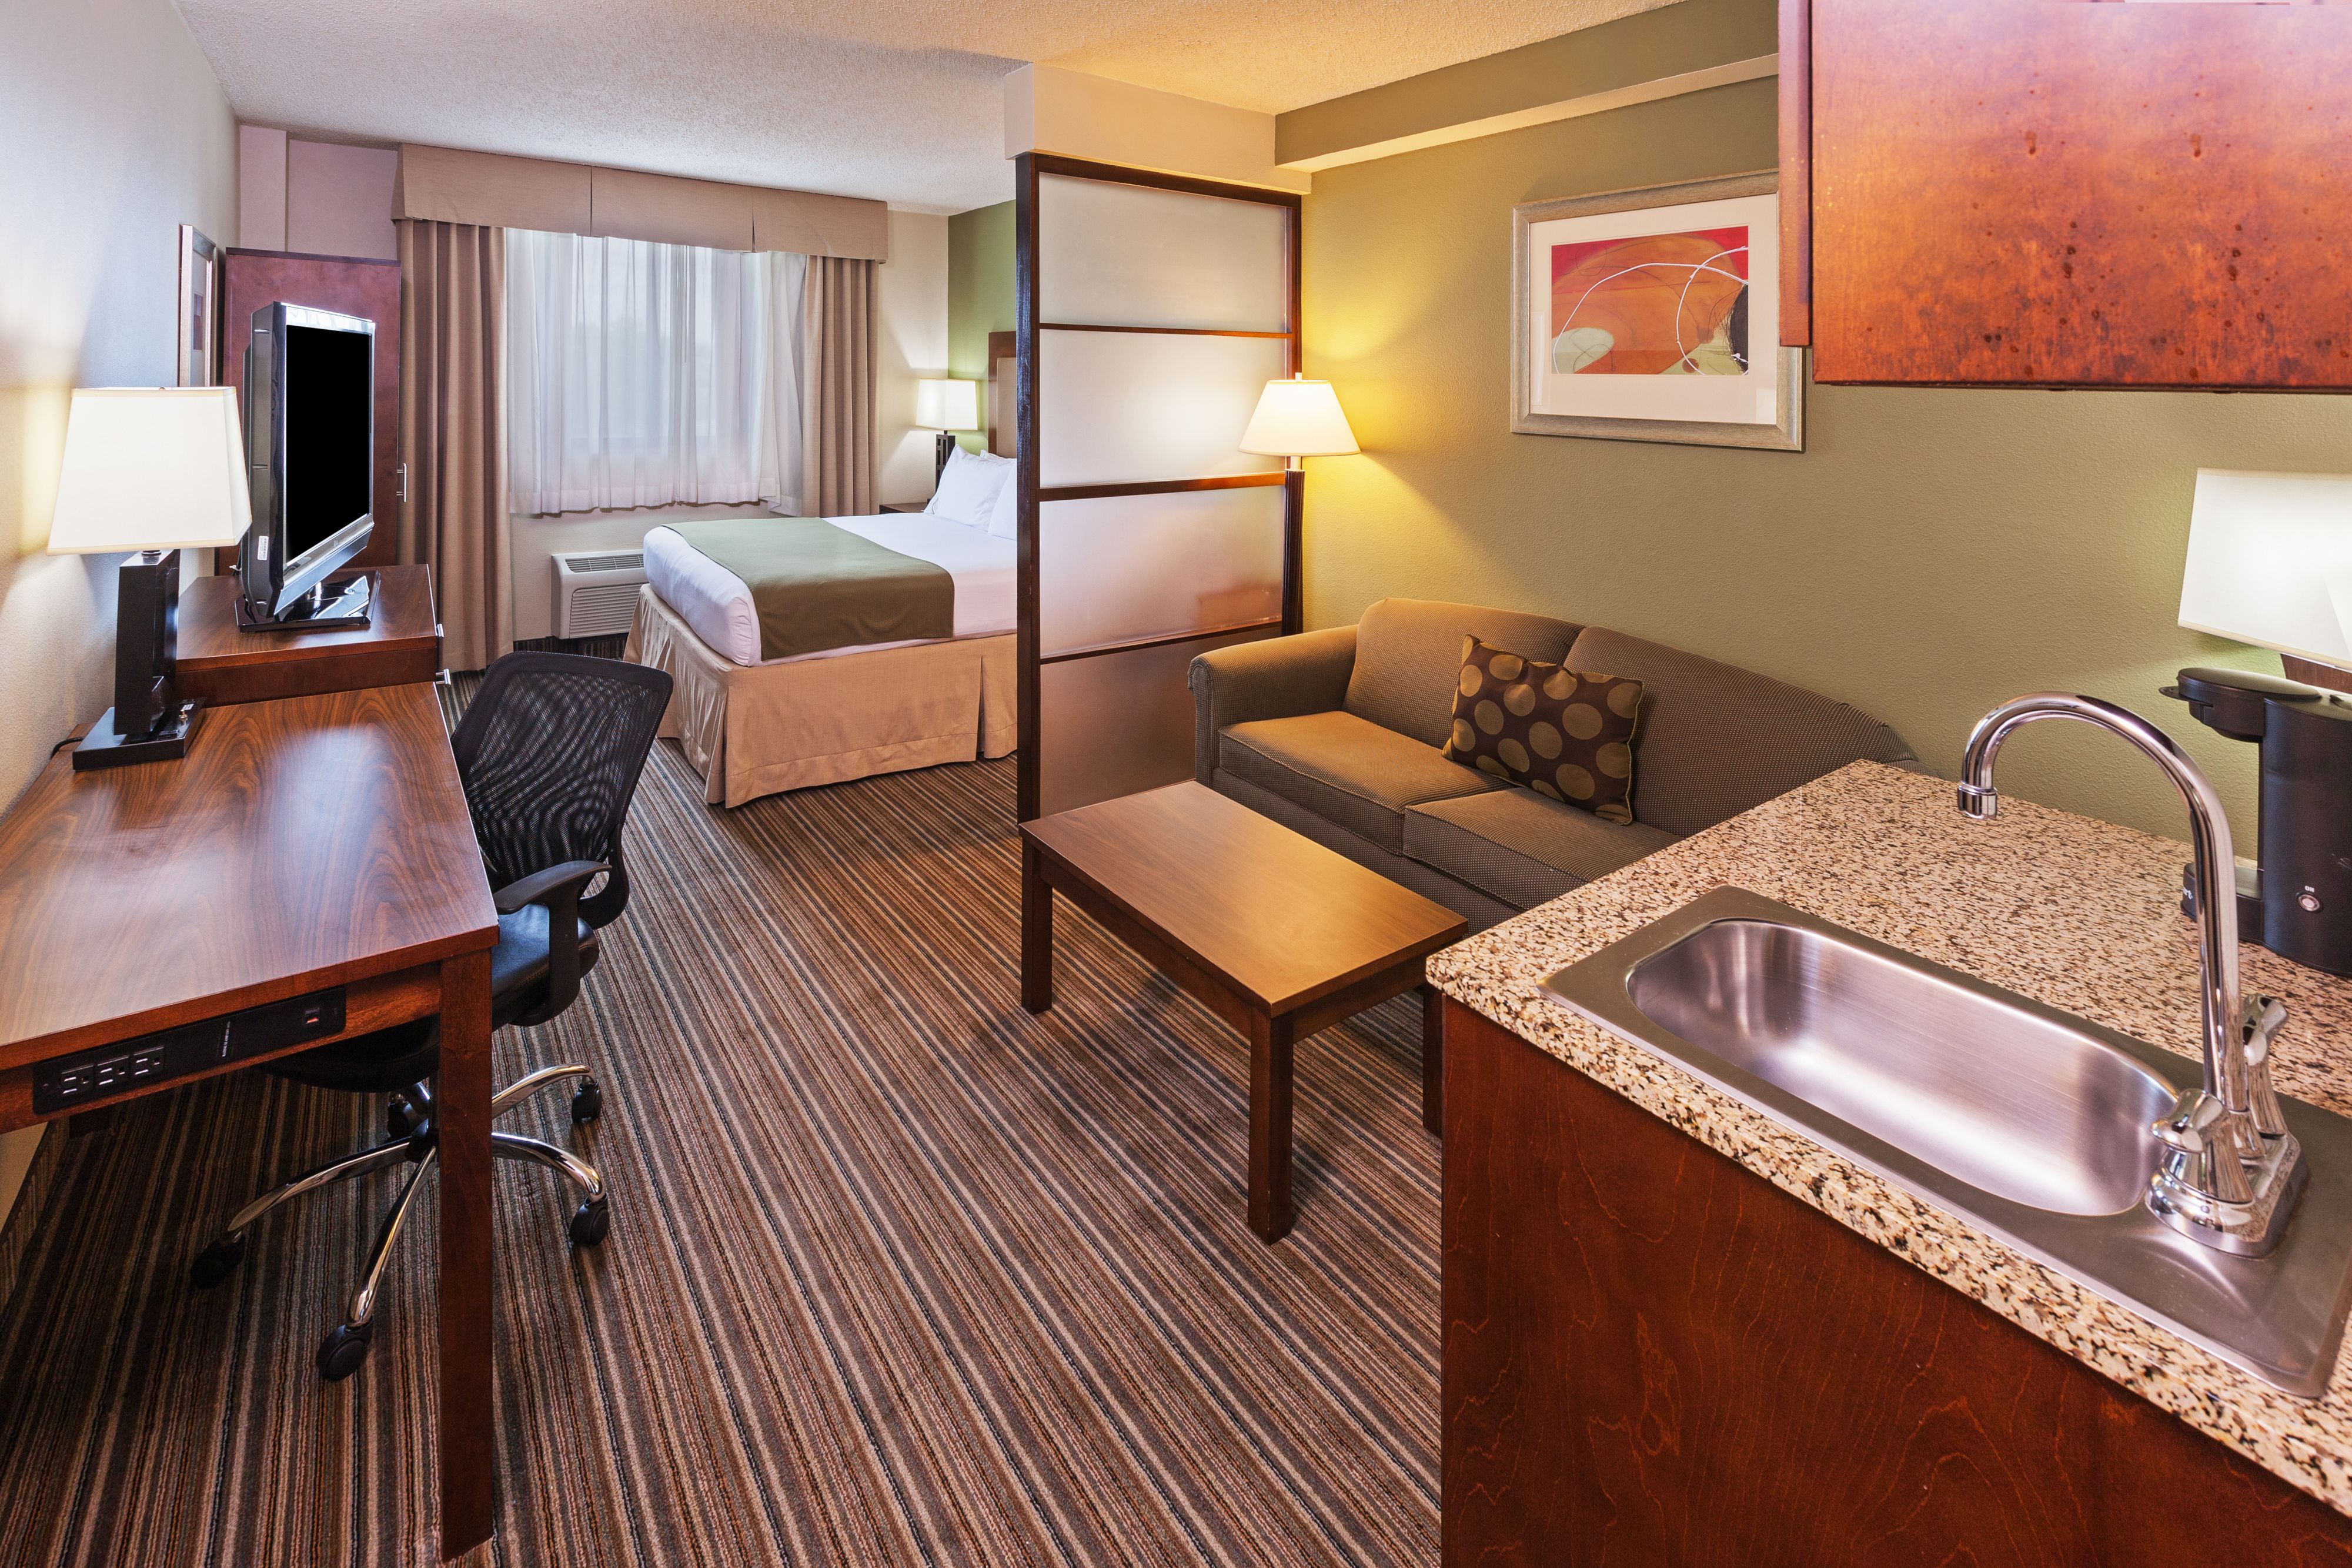 holiday-inn-express-and-suites-fort-worth-5136935973-original.jpg